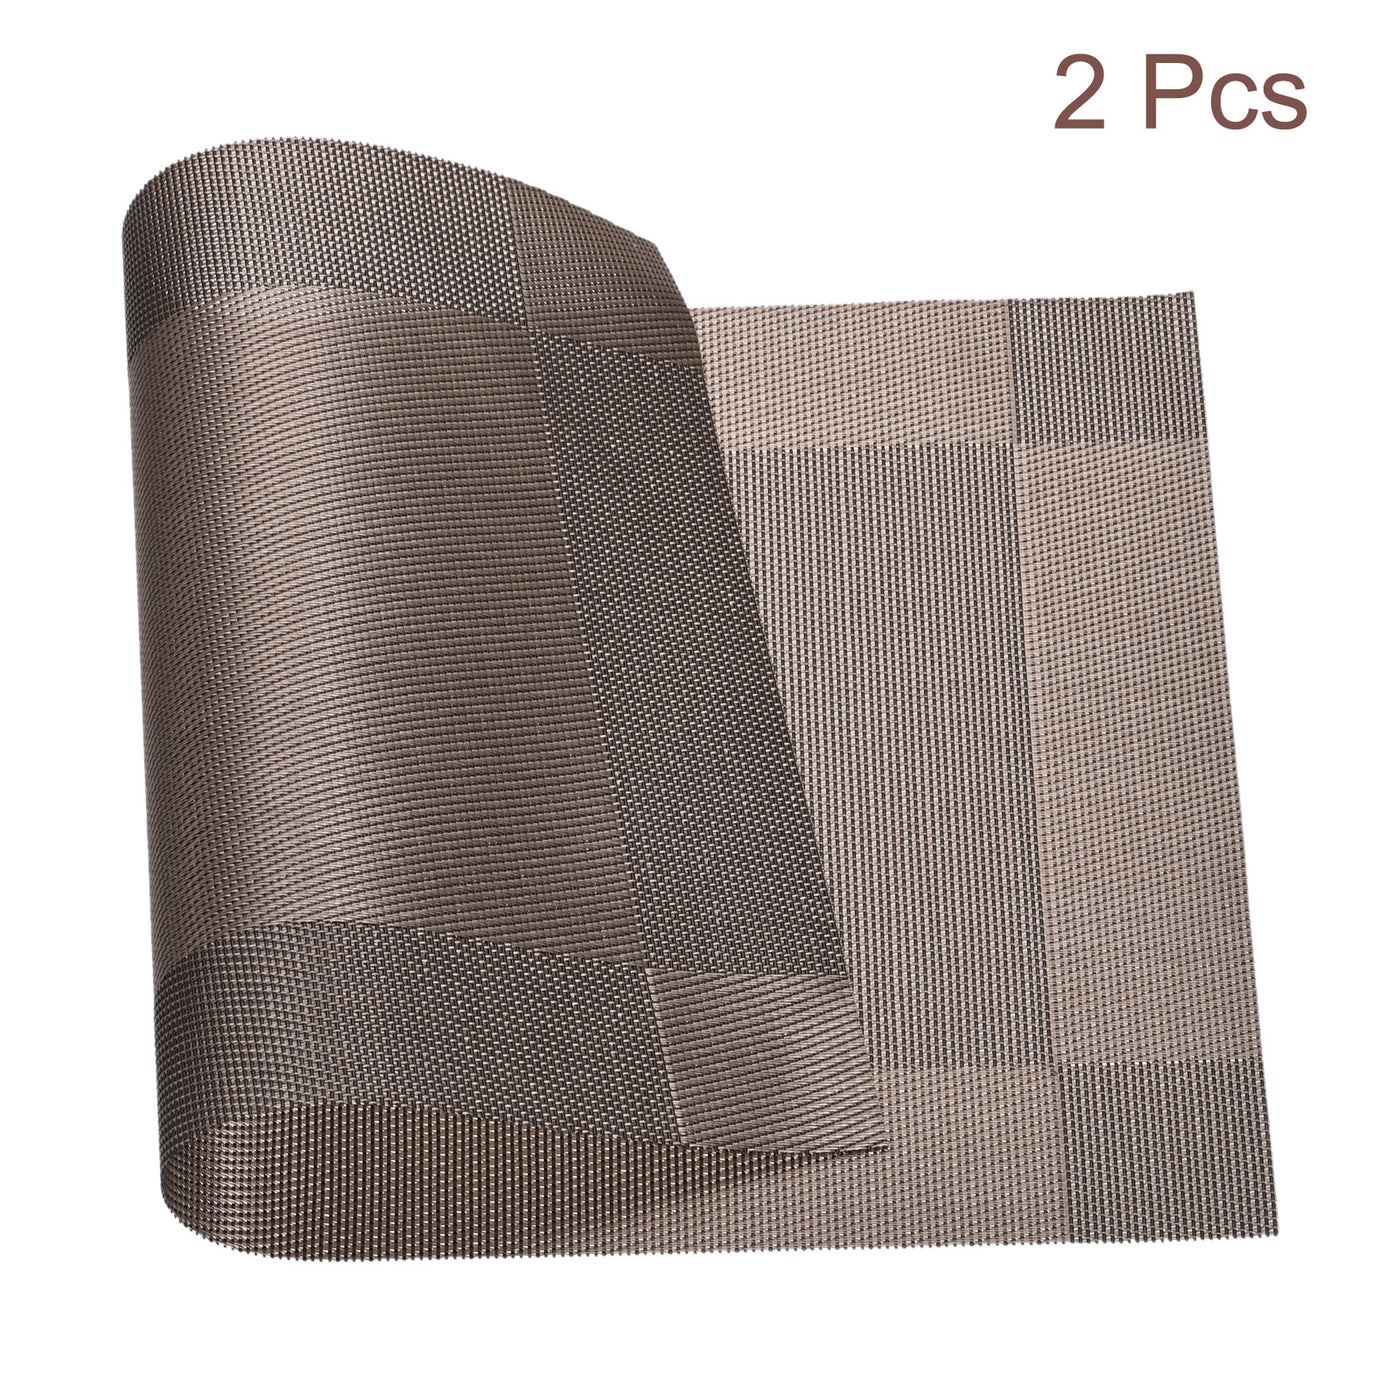 uxcell Uxcell Place Mats 450x300mm 2pcs PVC Table Washable Woven Placemat, Coffee